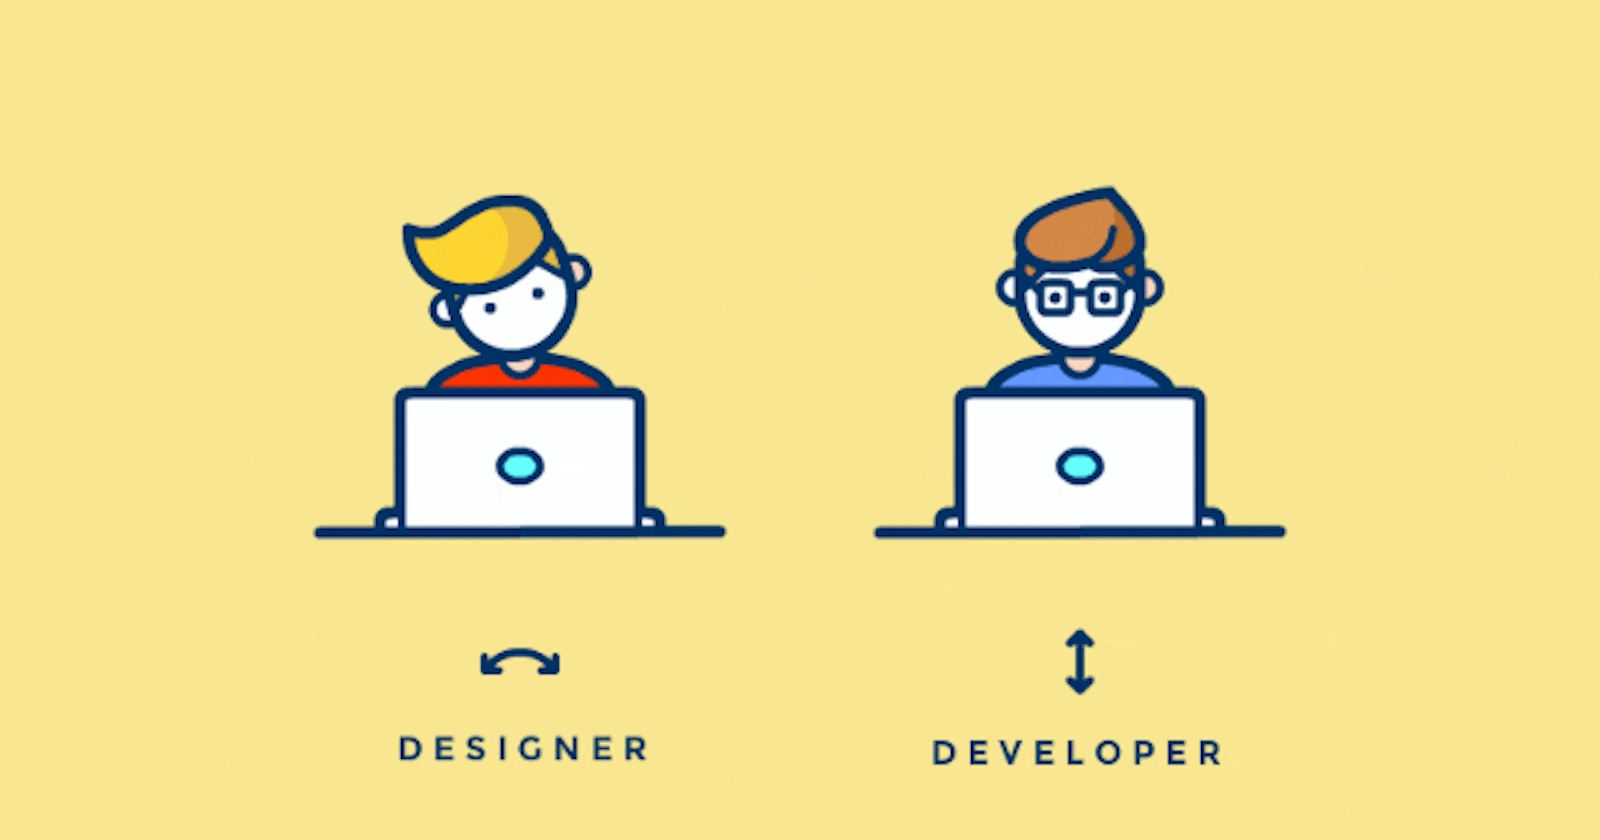 UI/UX Designer or Developer, Which is the better career choice?